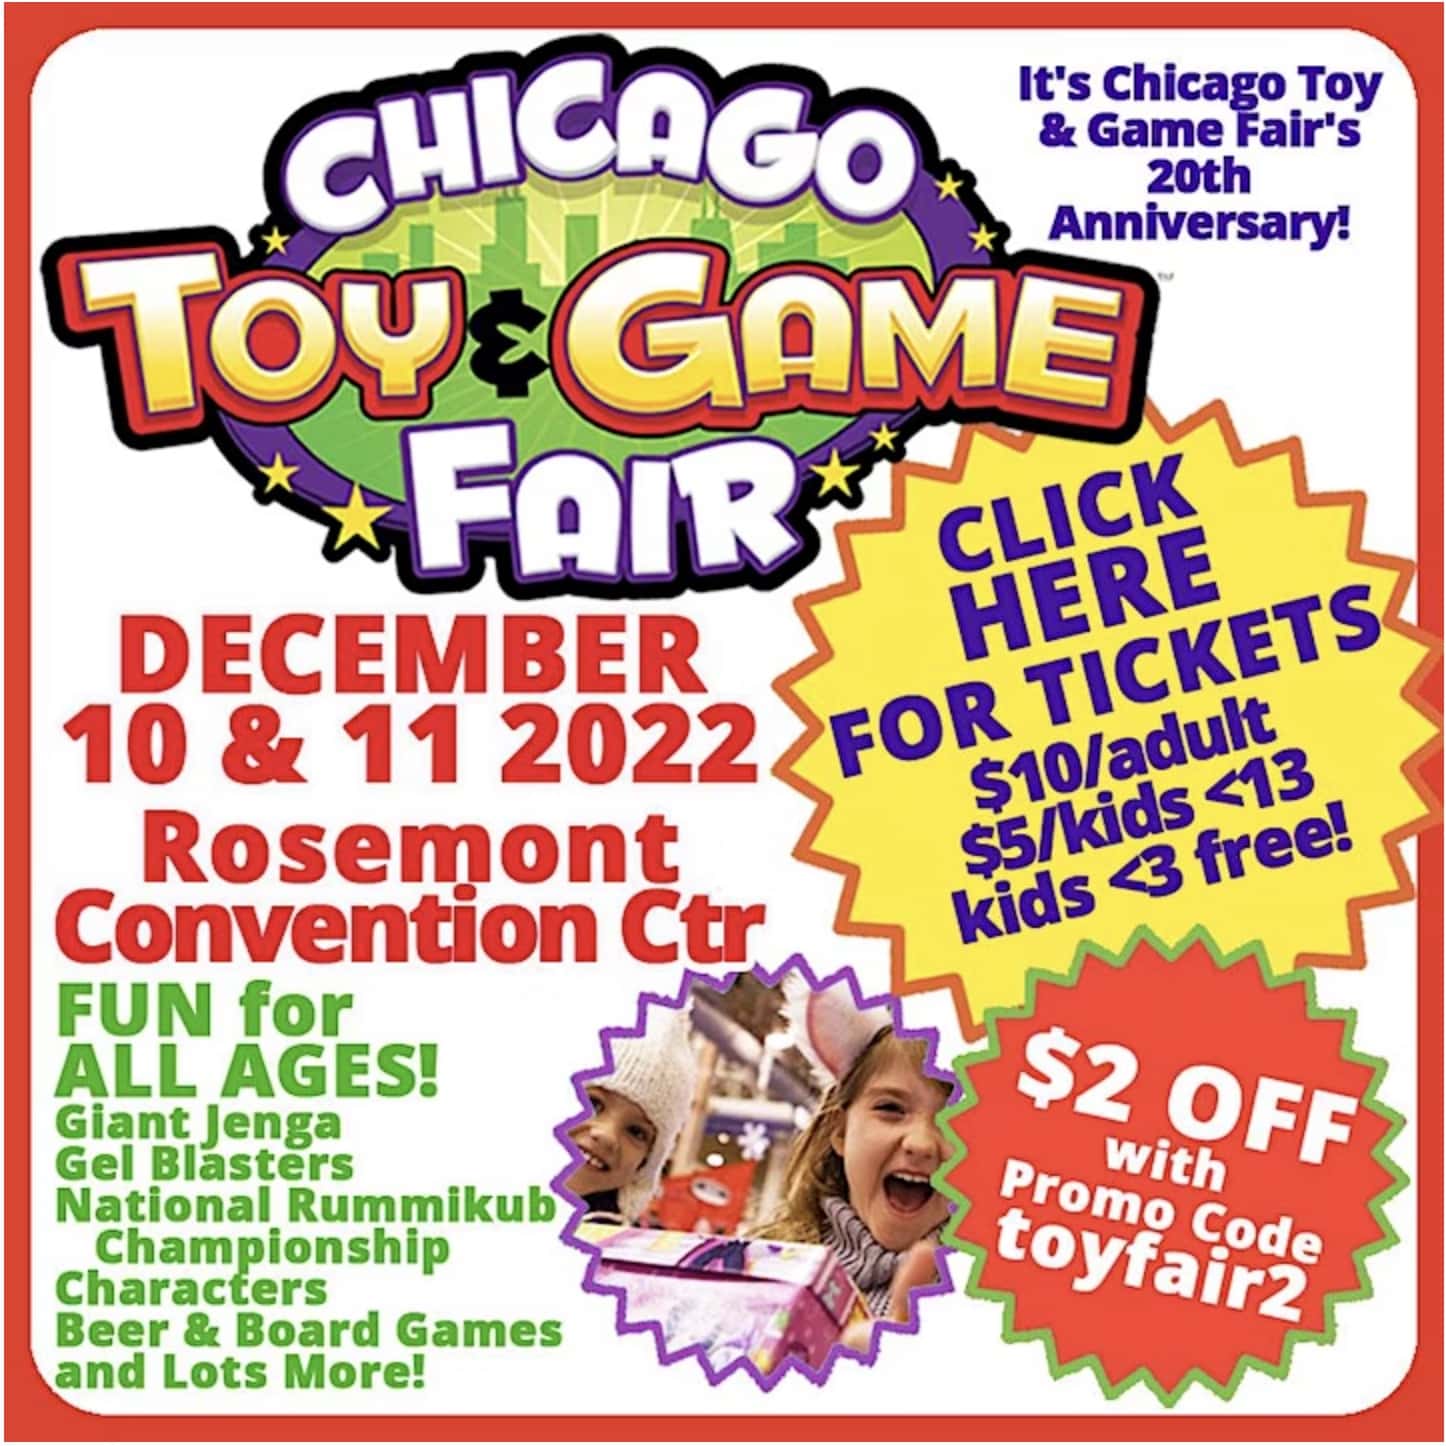 The Chicago Toy and Game Fair is Back!